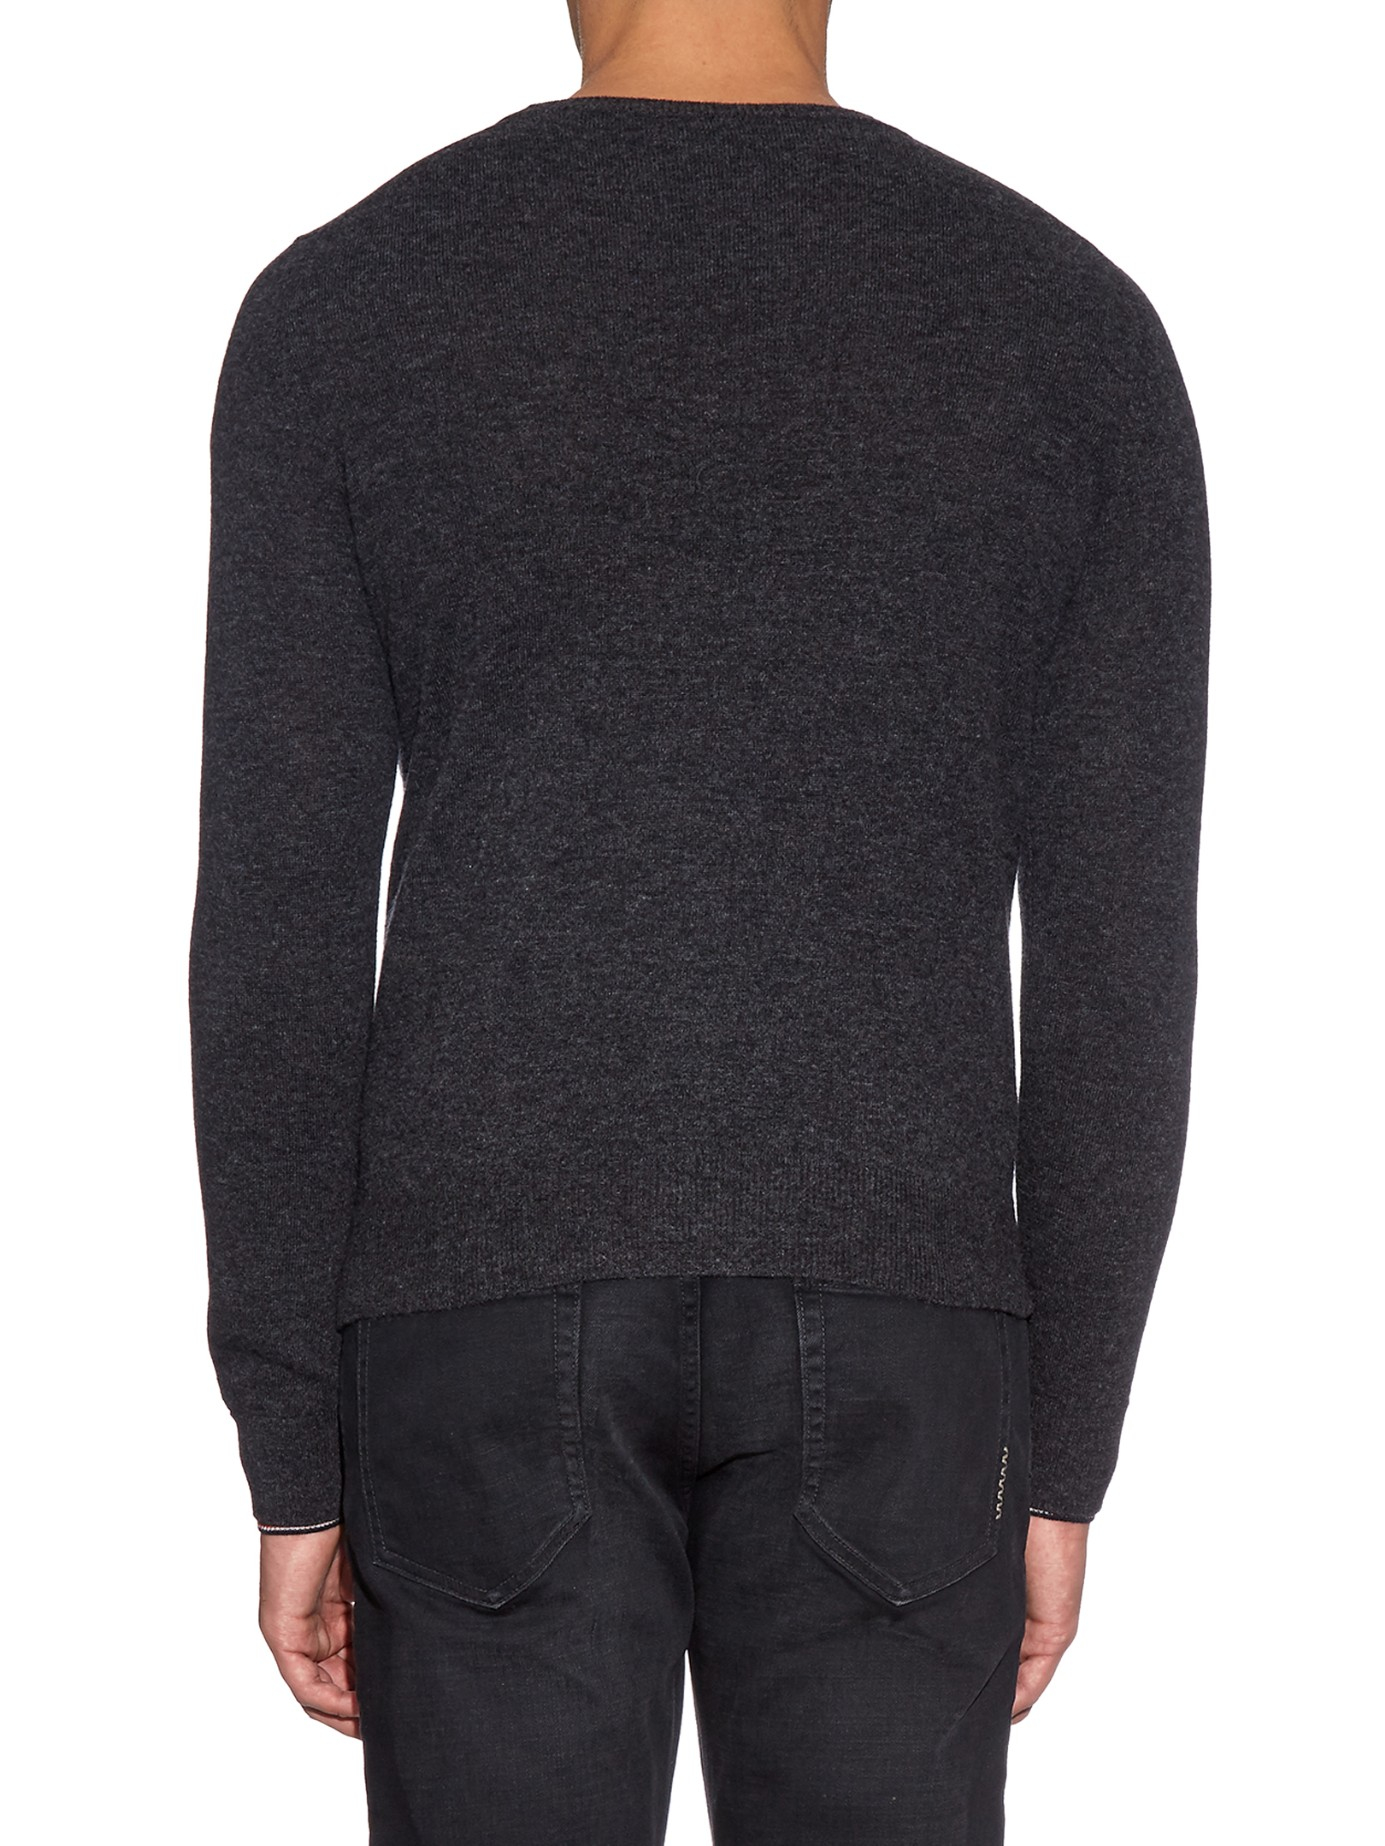 Lyst - Moncler Crew-neck Wool Sweater in Gray for Men